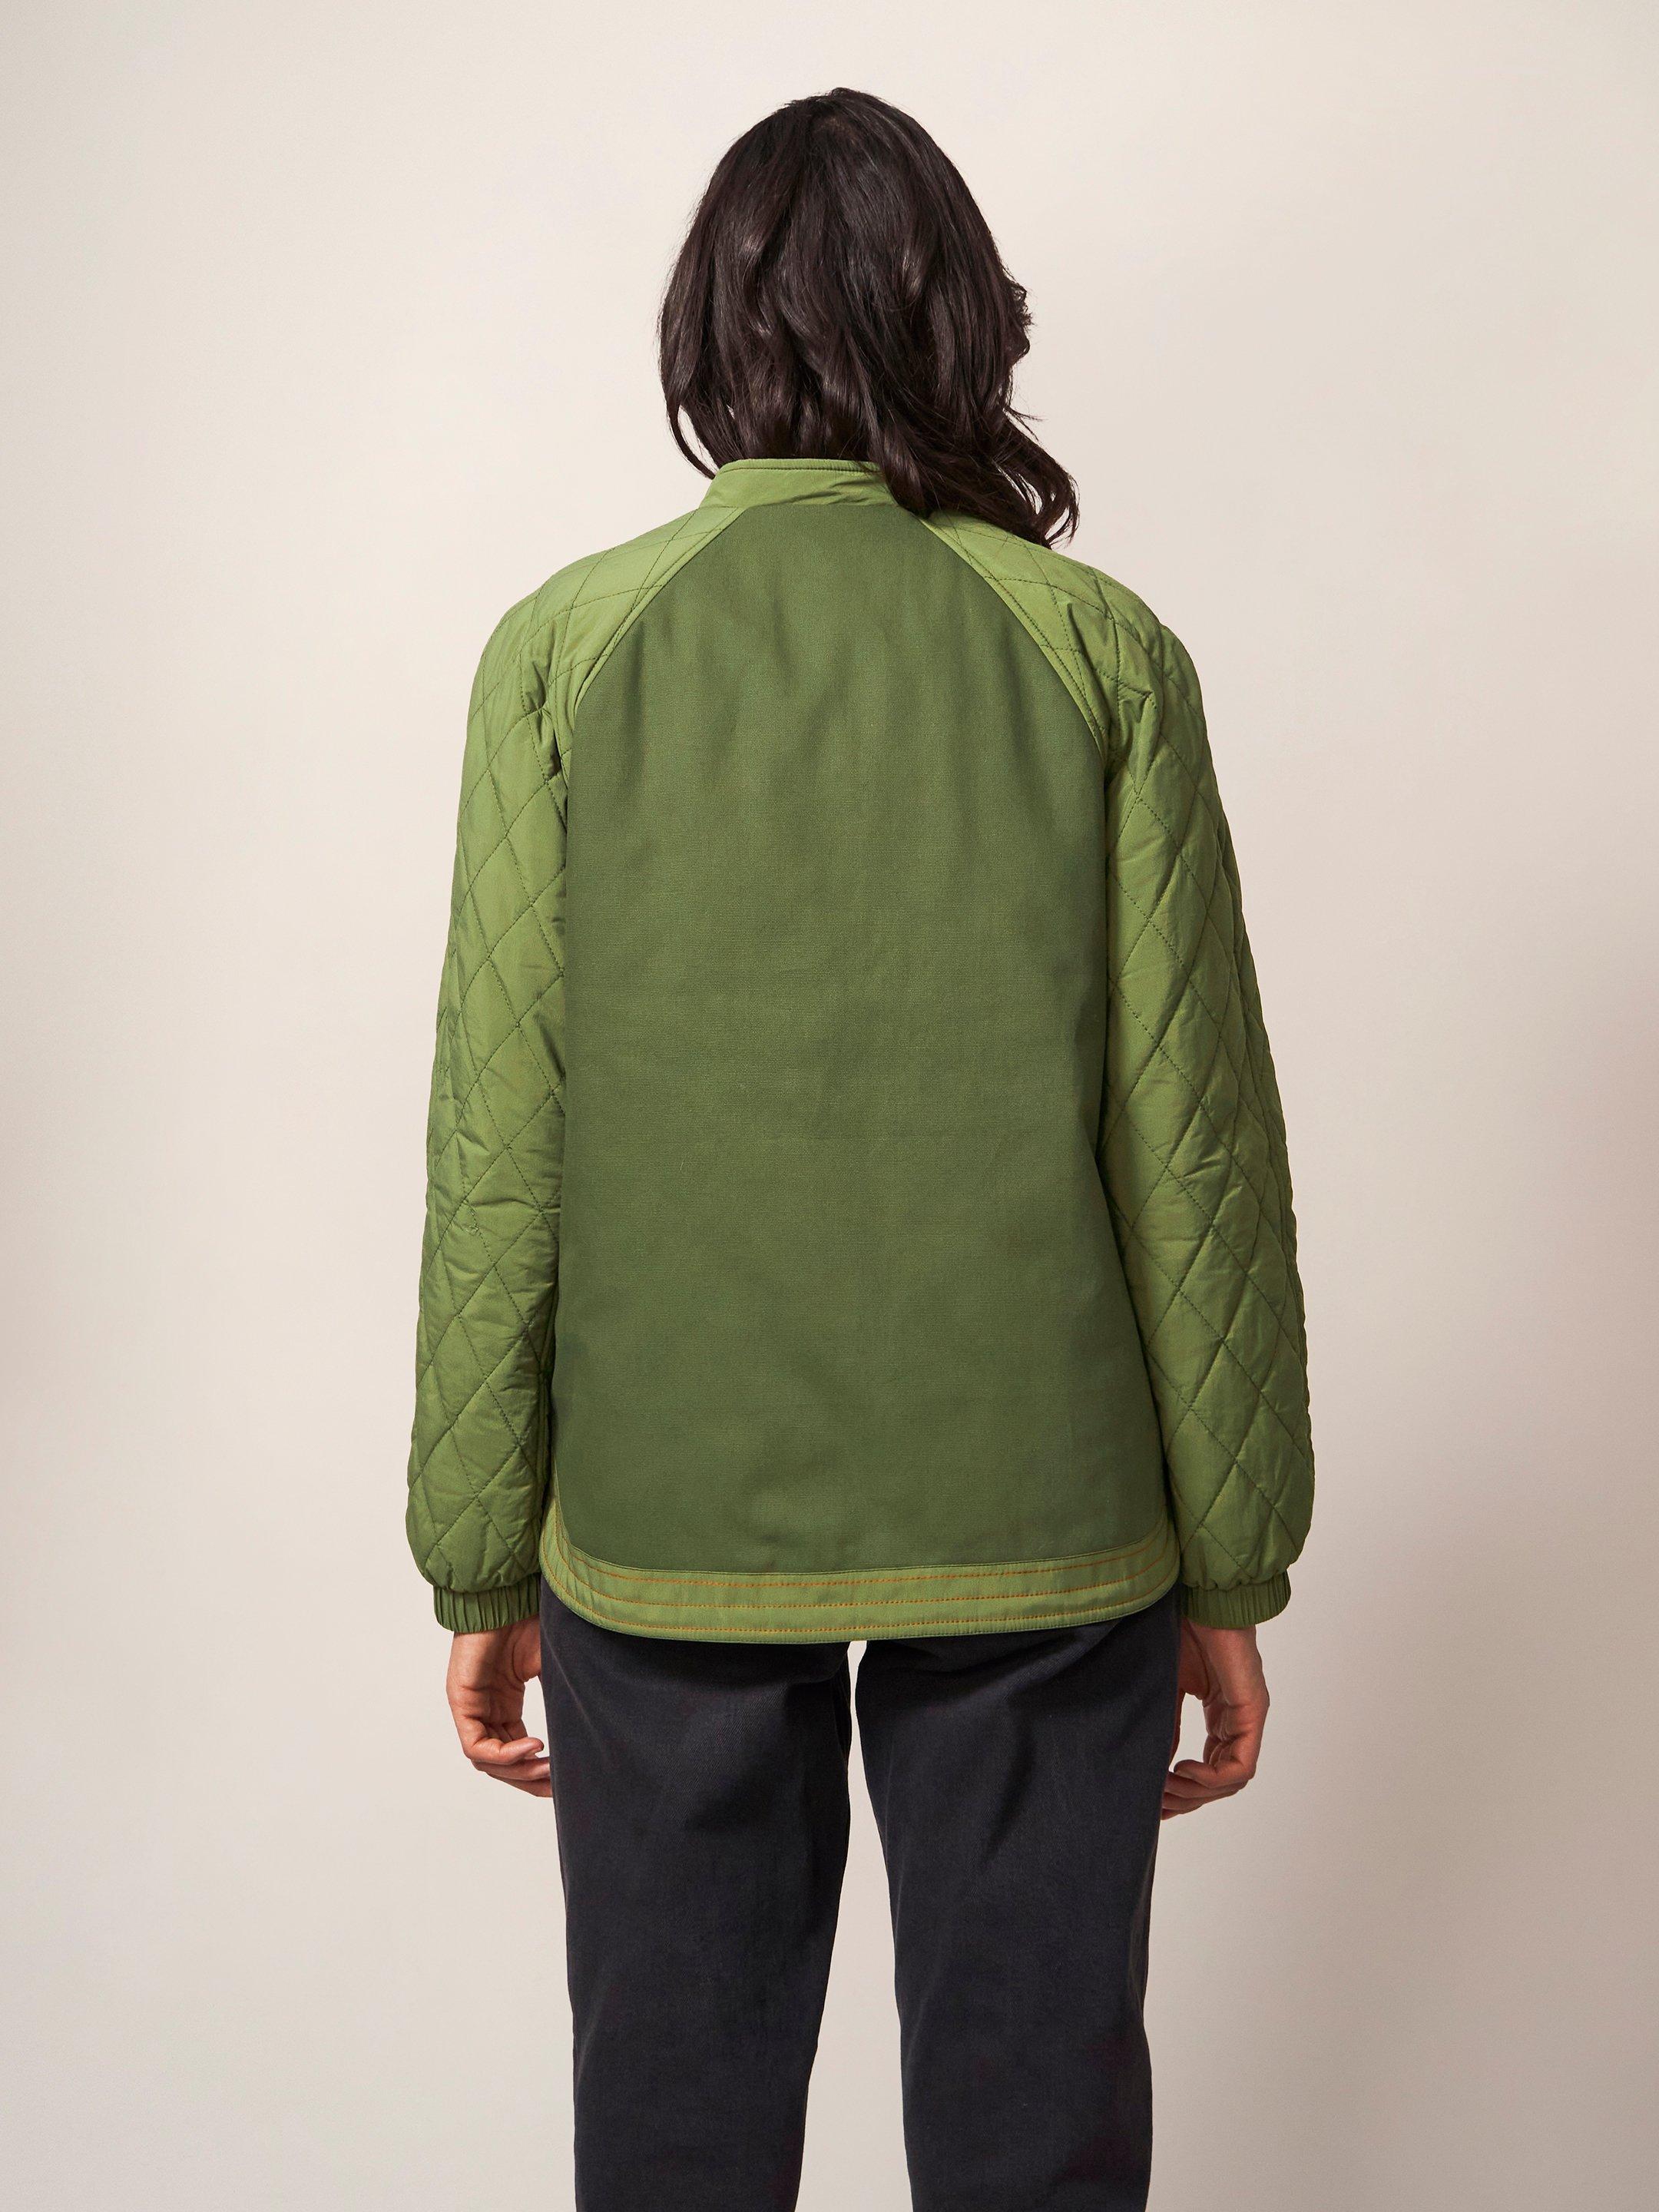 Avery Quilted Jacket in KHAKI GRN - MODEL BACK